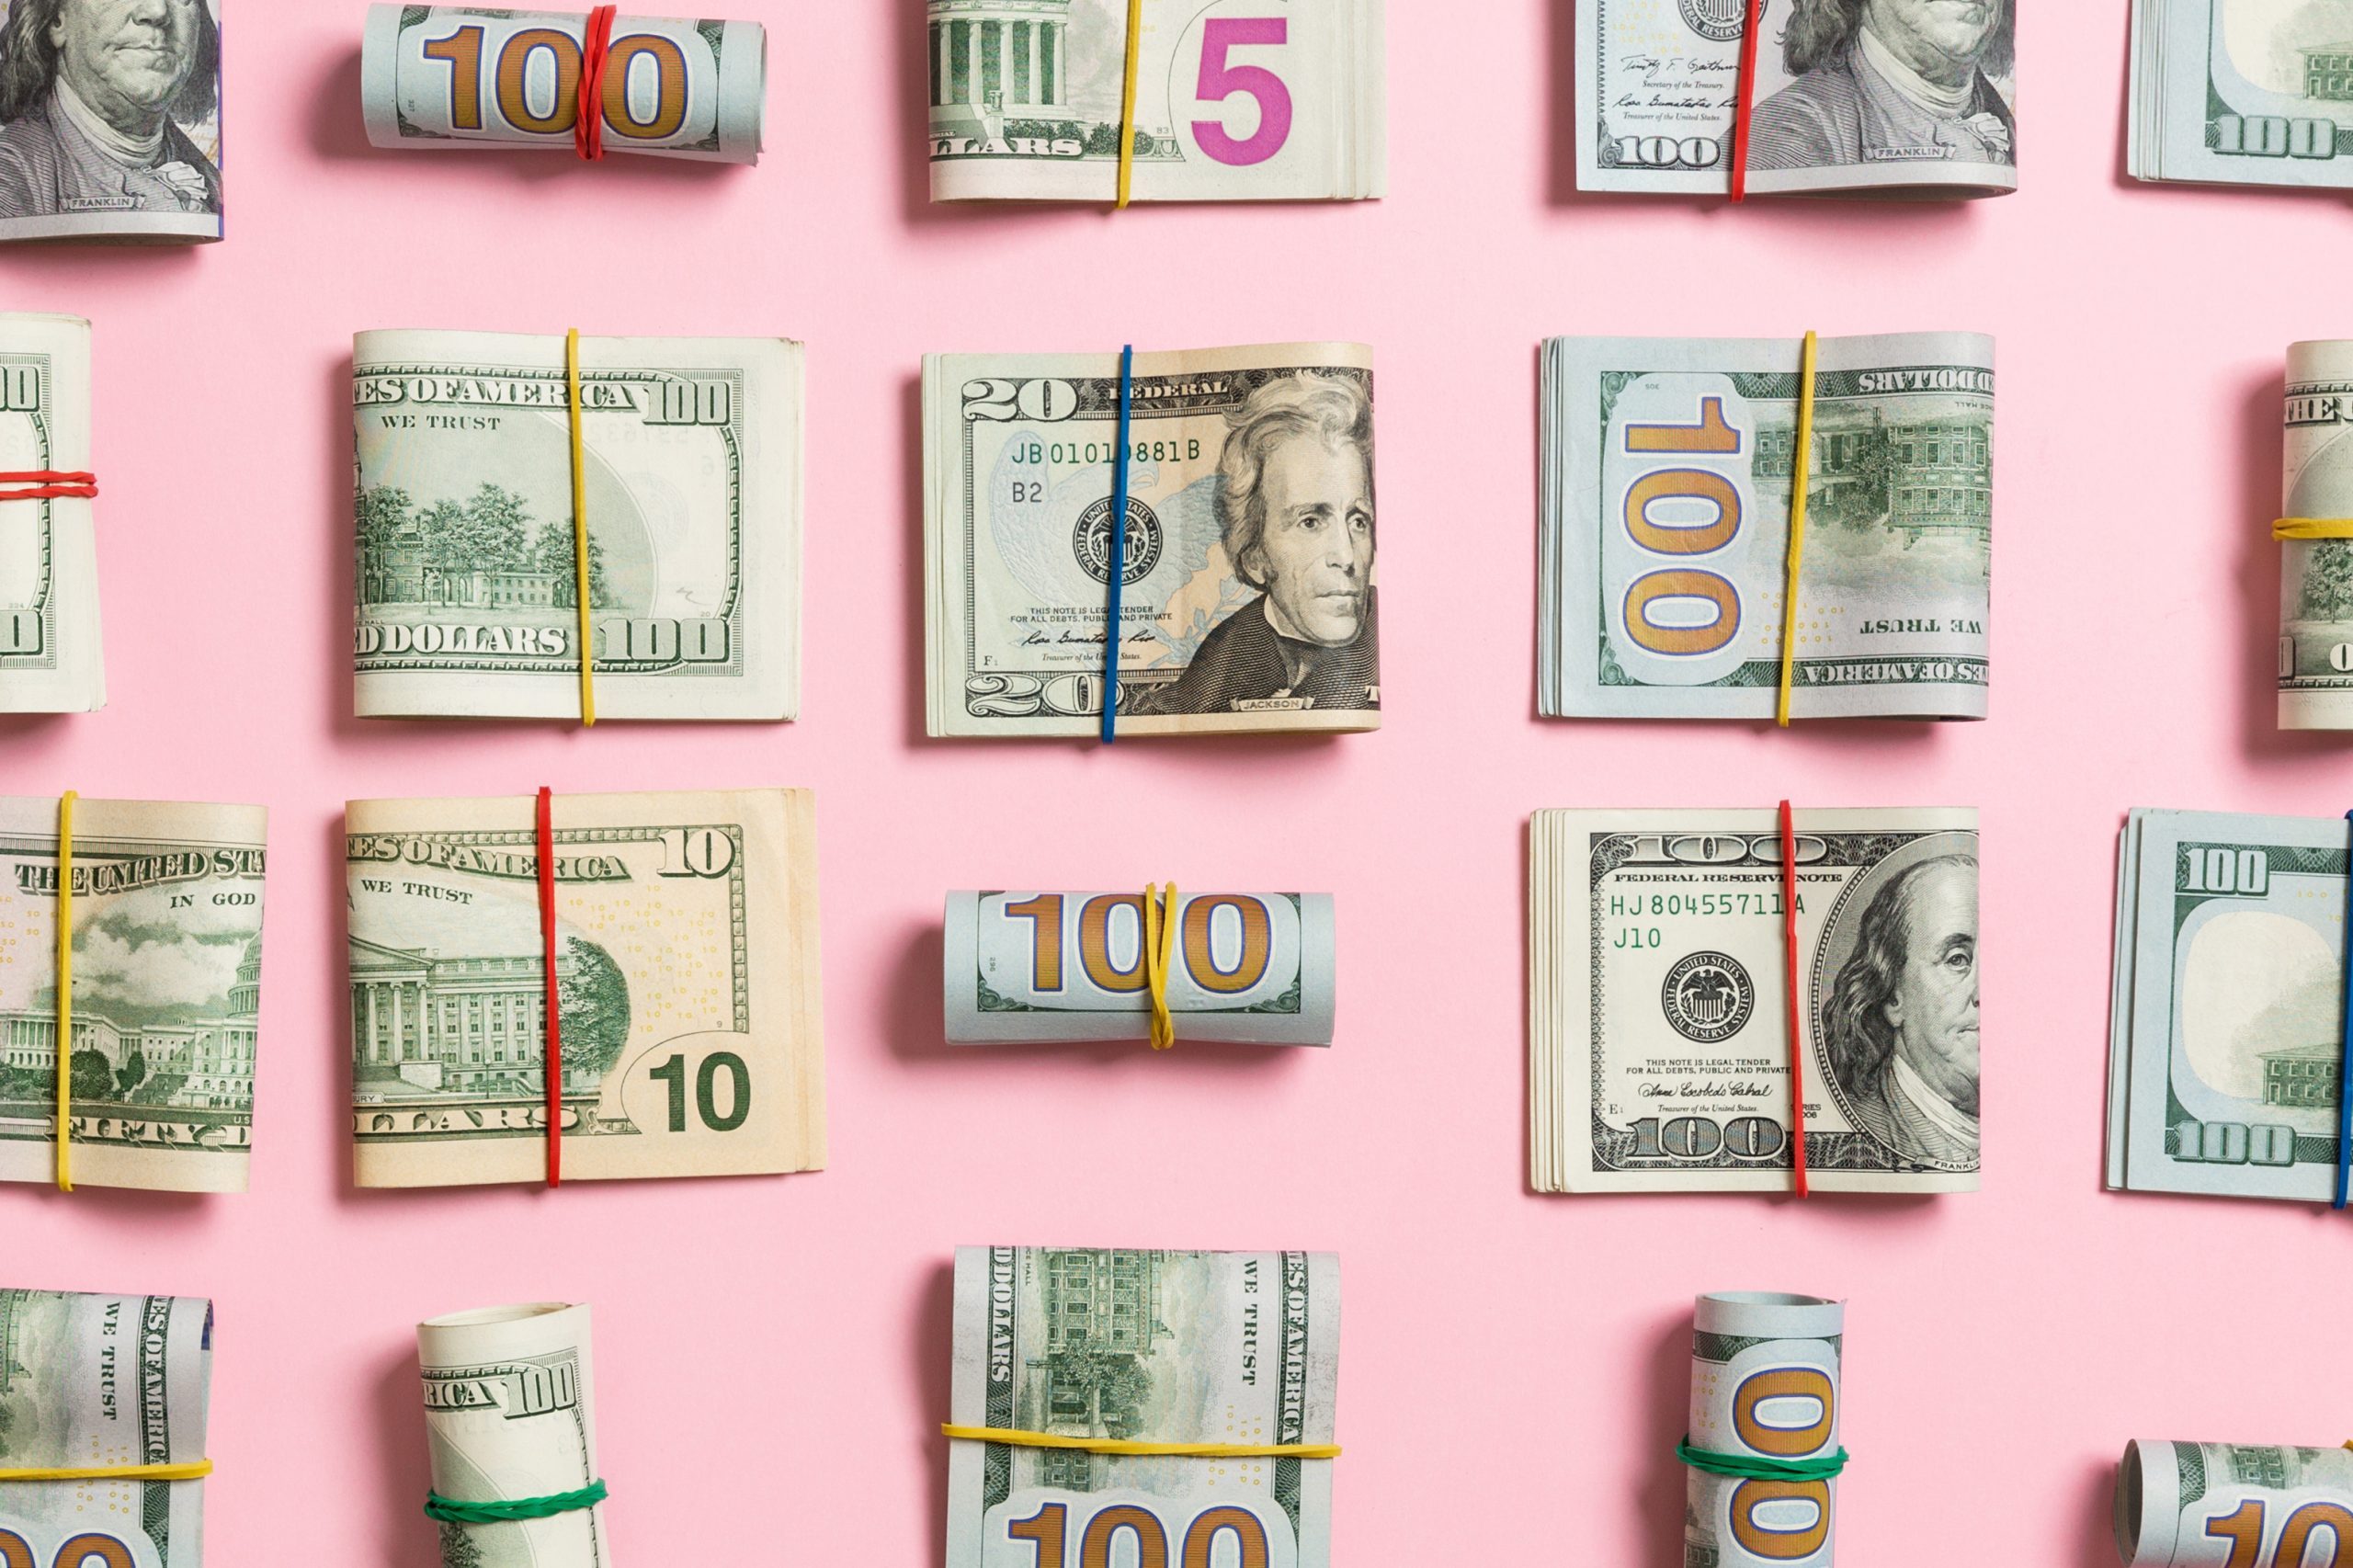 wads and rolls of money arranged on a pink background